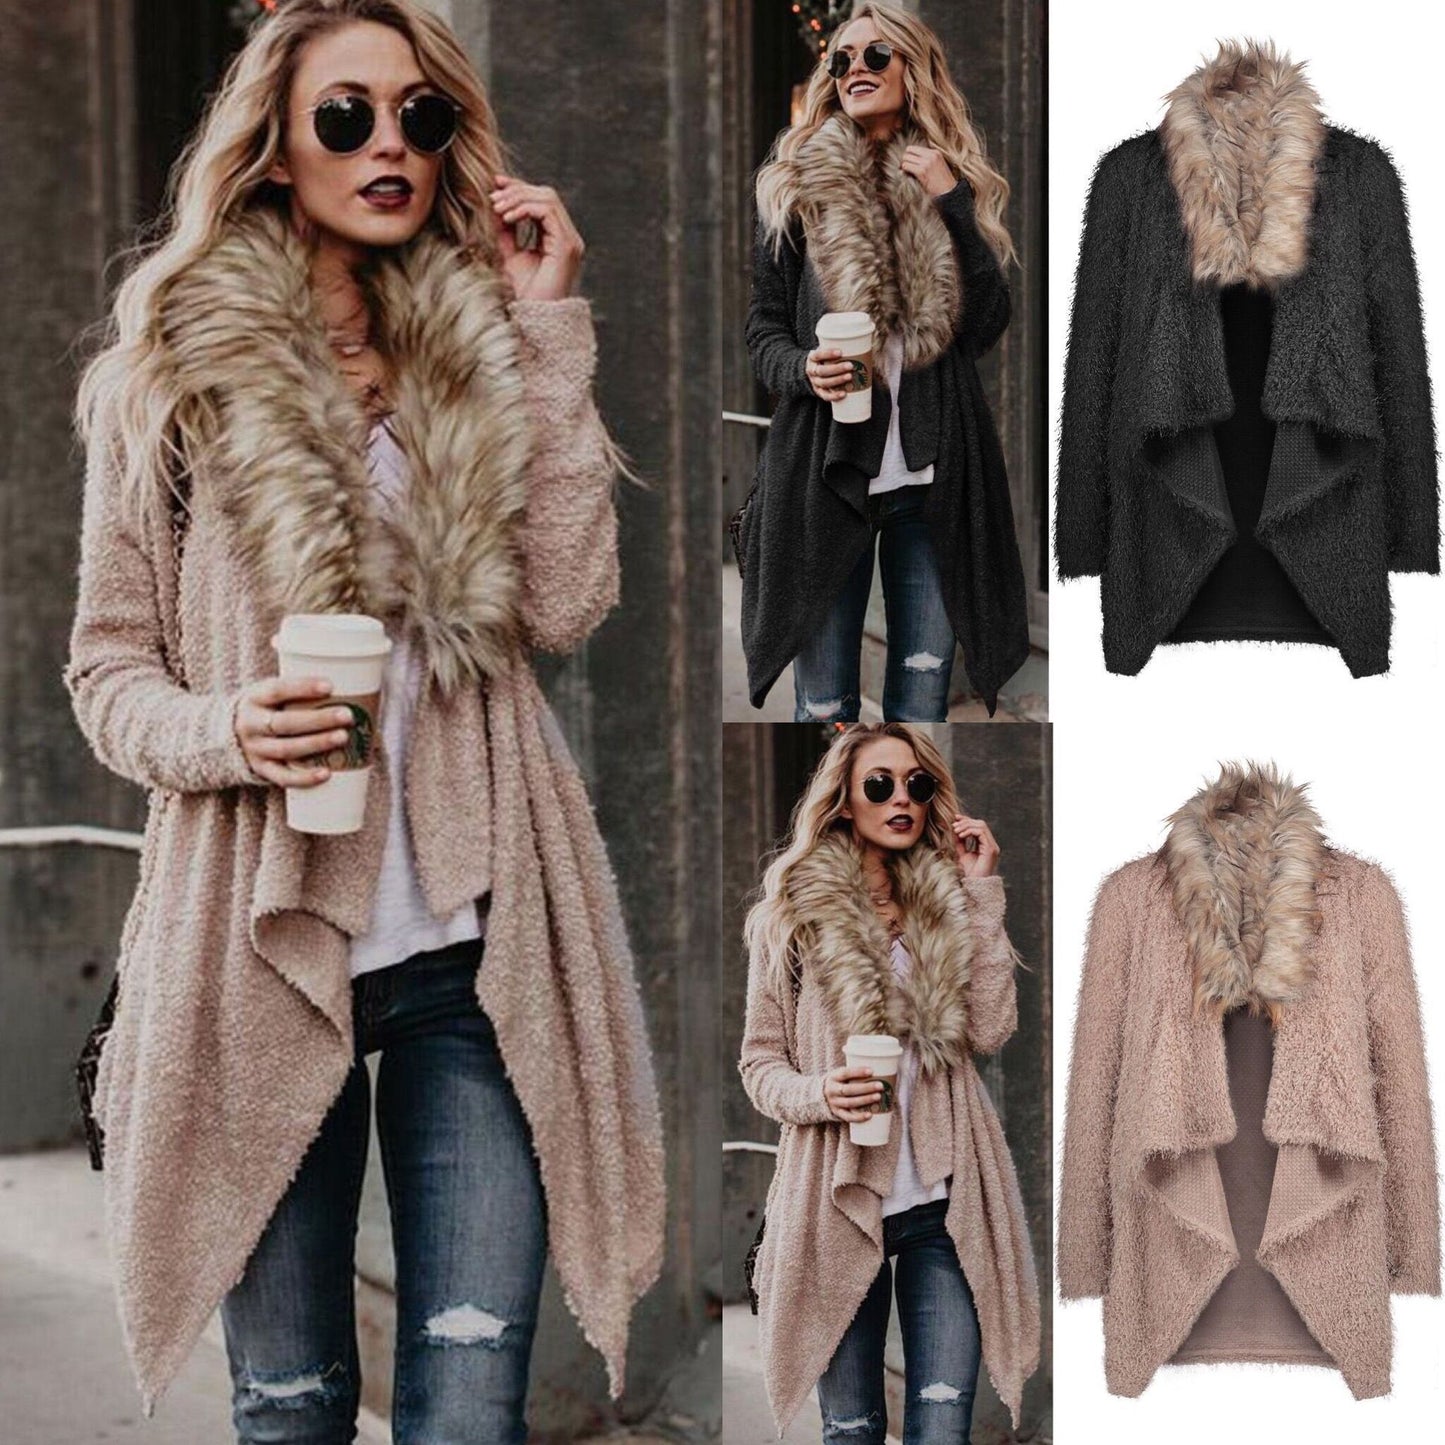 Cardigan Women Sweaters 2022 new hot style collar cardigan plush sweaters women fashion Southern Vintage Boutique